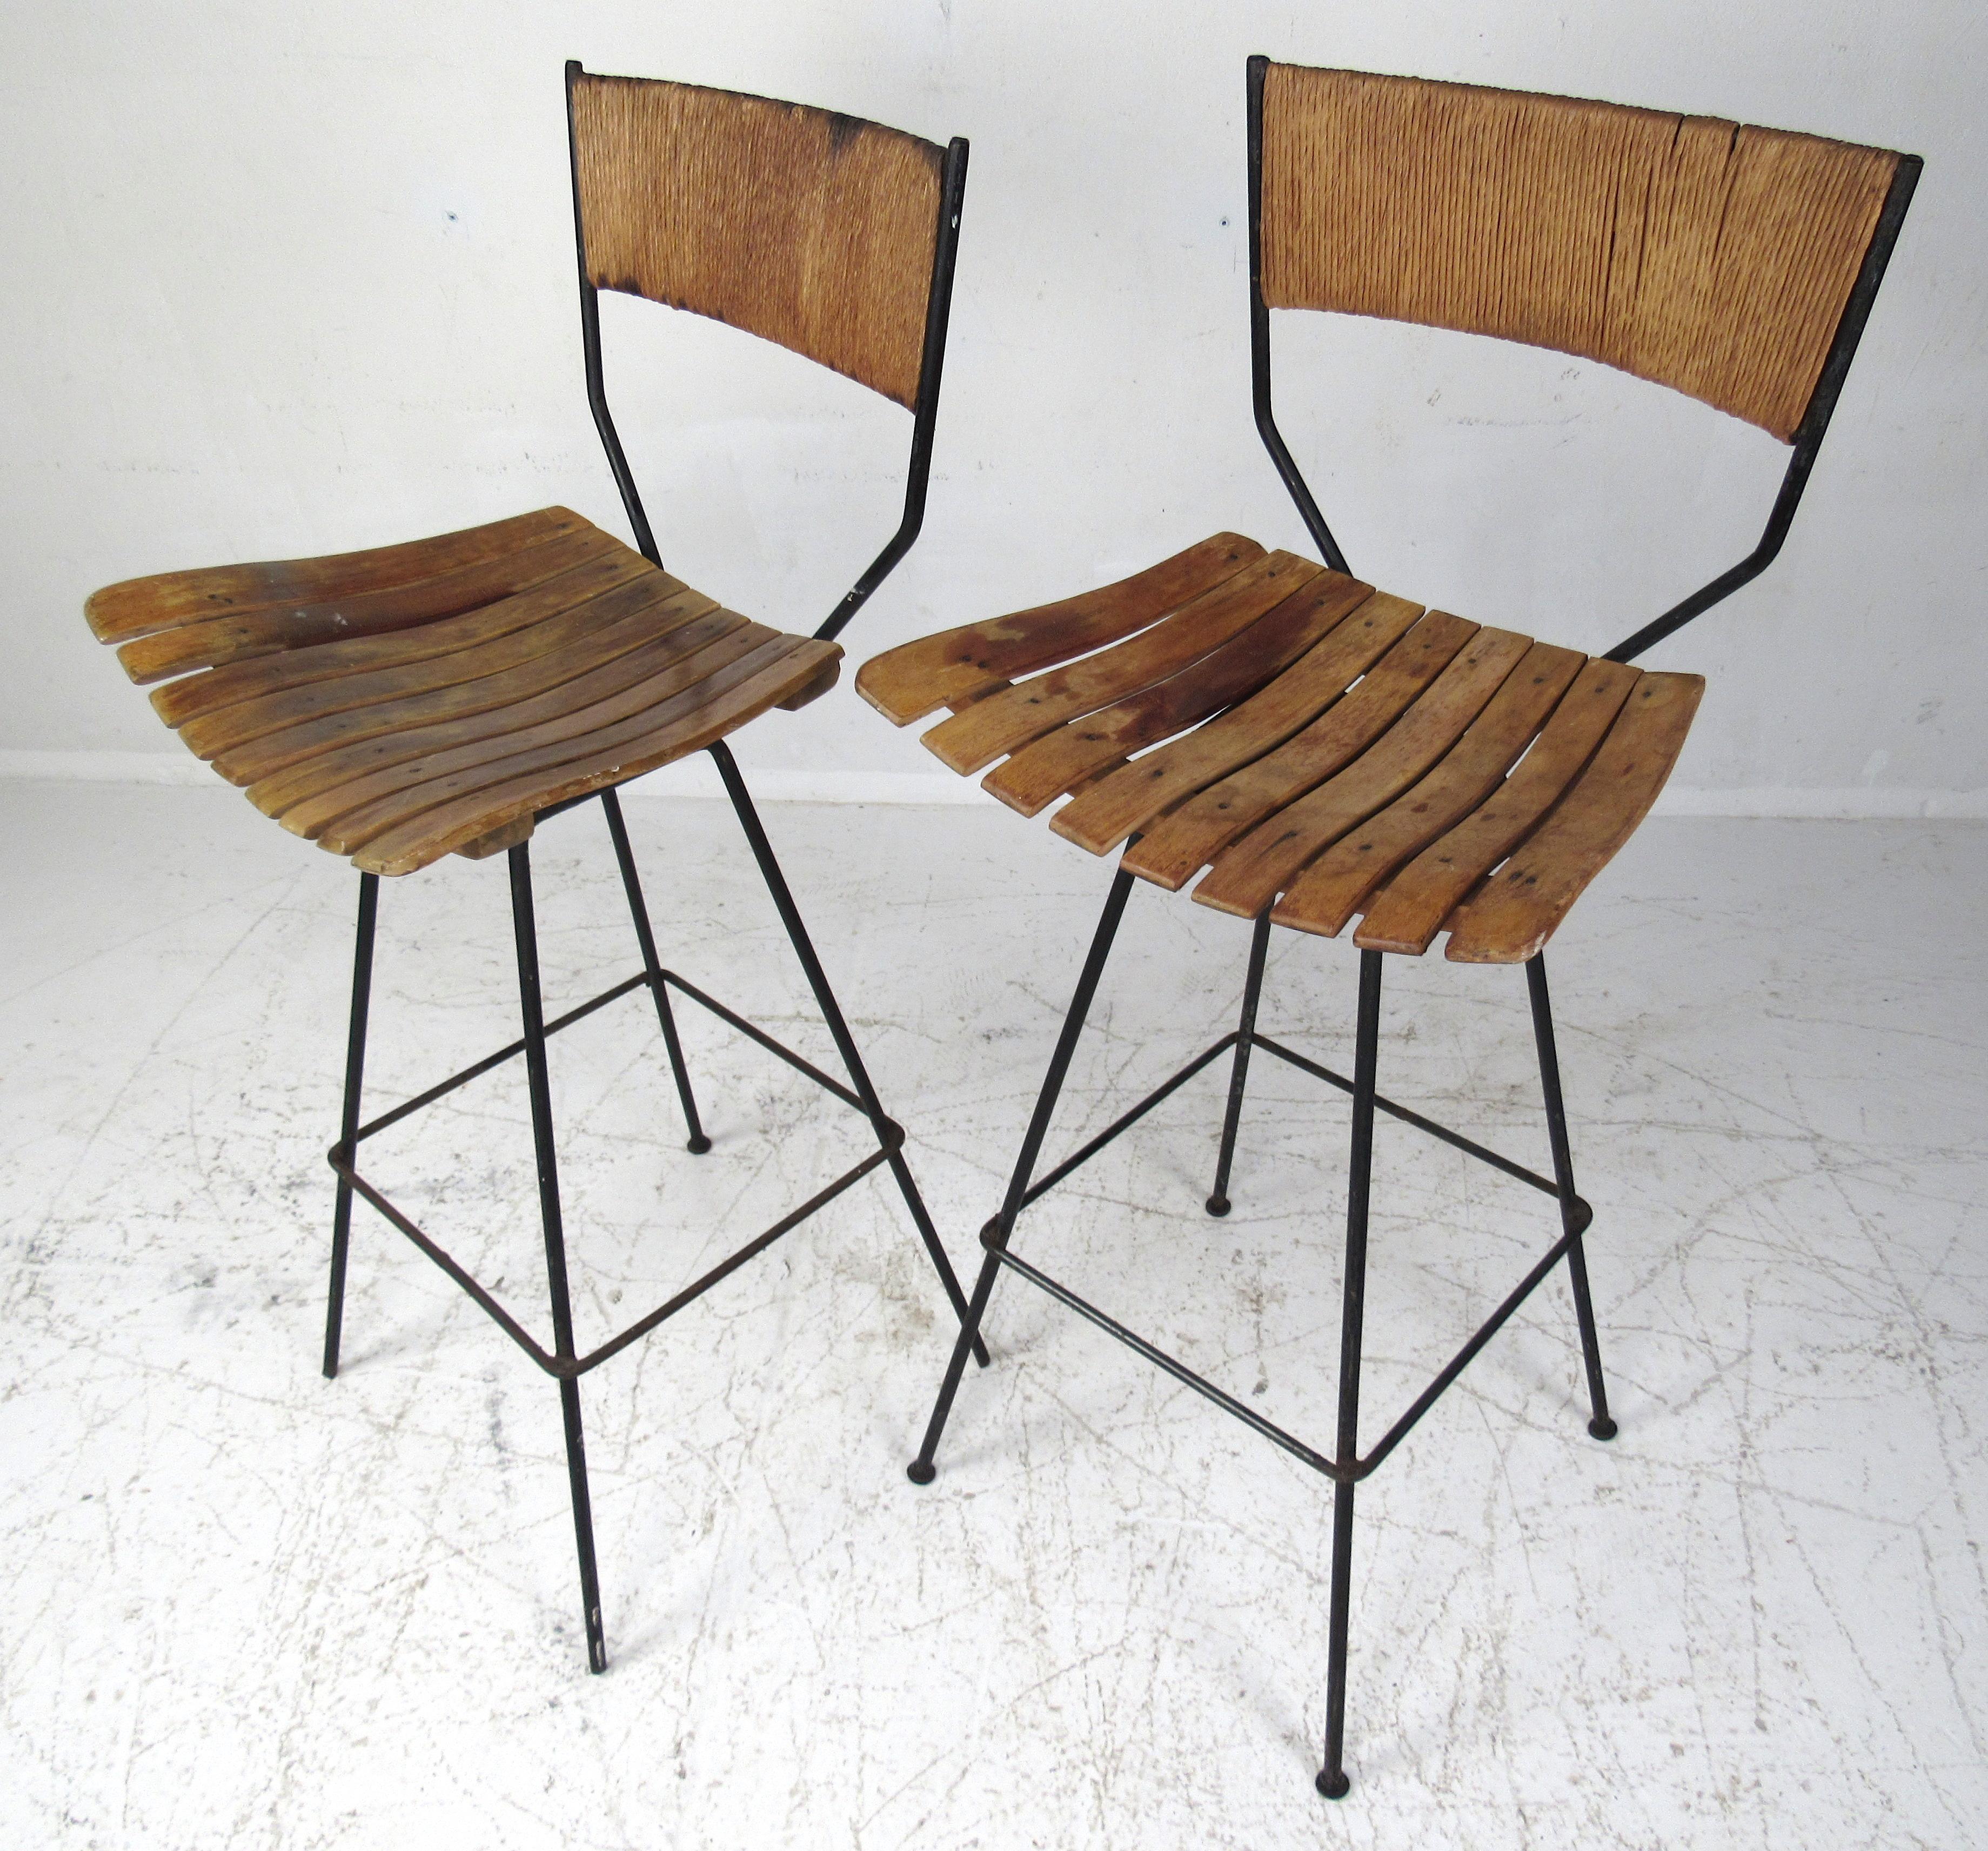 Pair of Arthur Umanoff tall swivel bar stools designed for Raymor in the 1960s. These iconic stools feature an iron base with bentwood slatted seats and a woven rush backrest. The perfect addition to the mid-century environment. Please confirm item